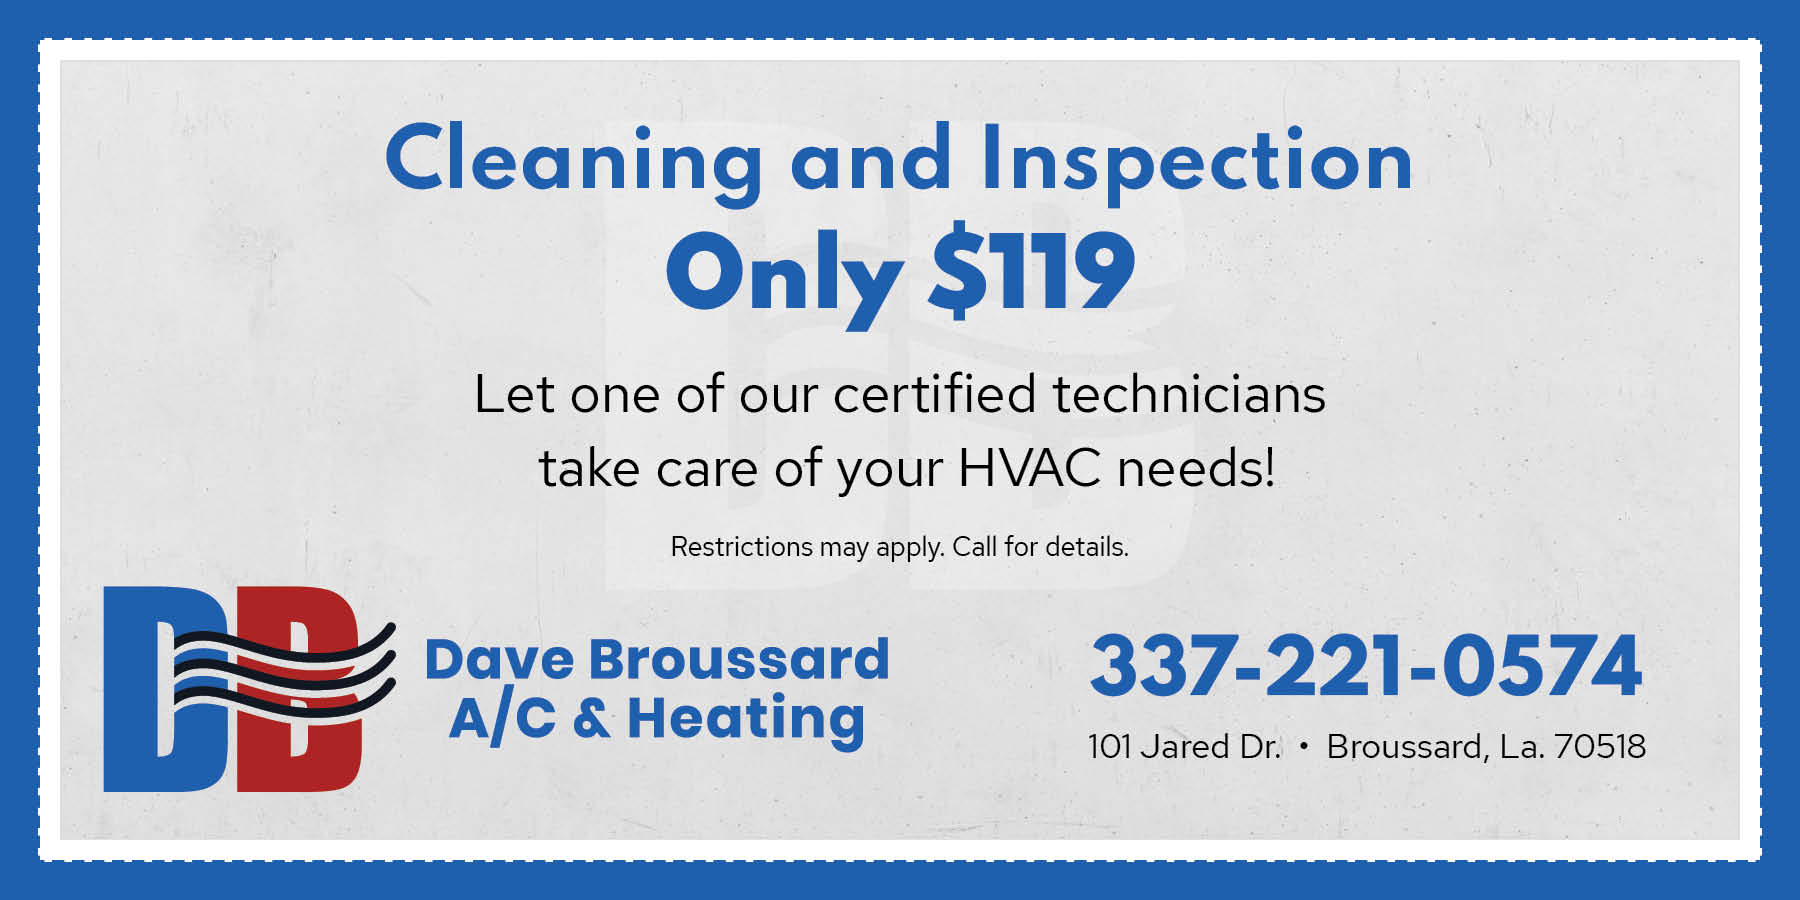 Dave Broussard cleaning and inspection special $119.